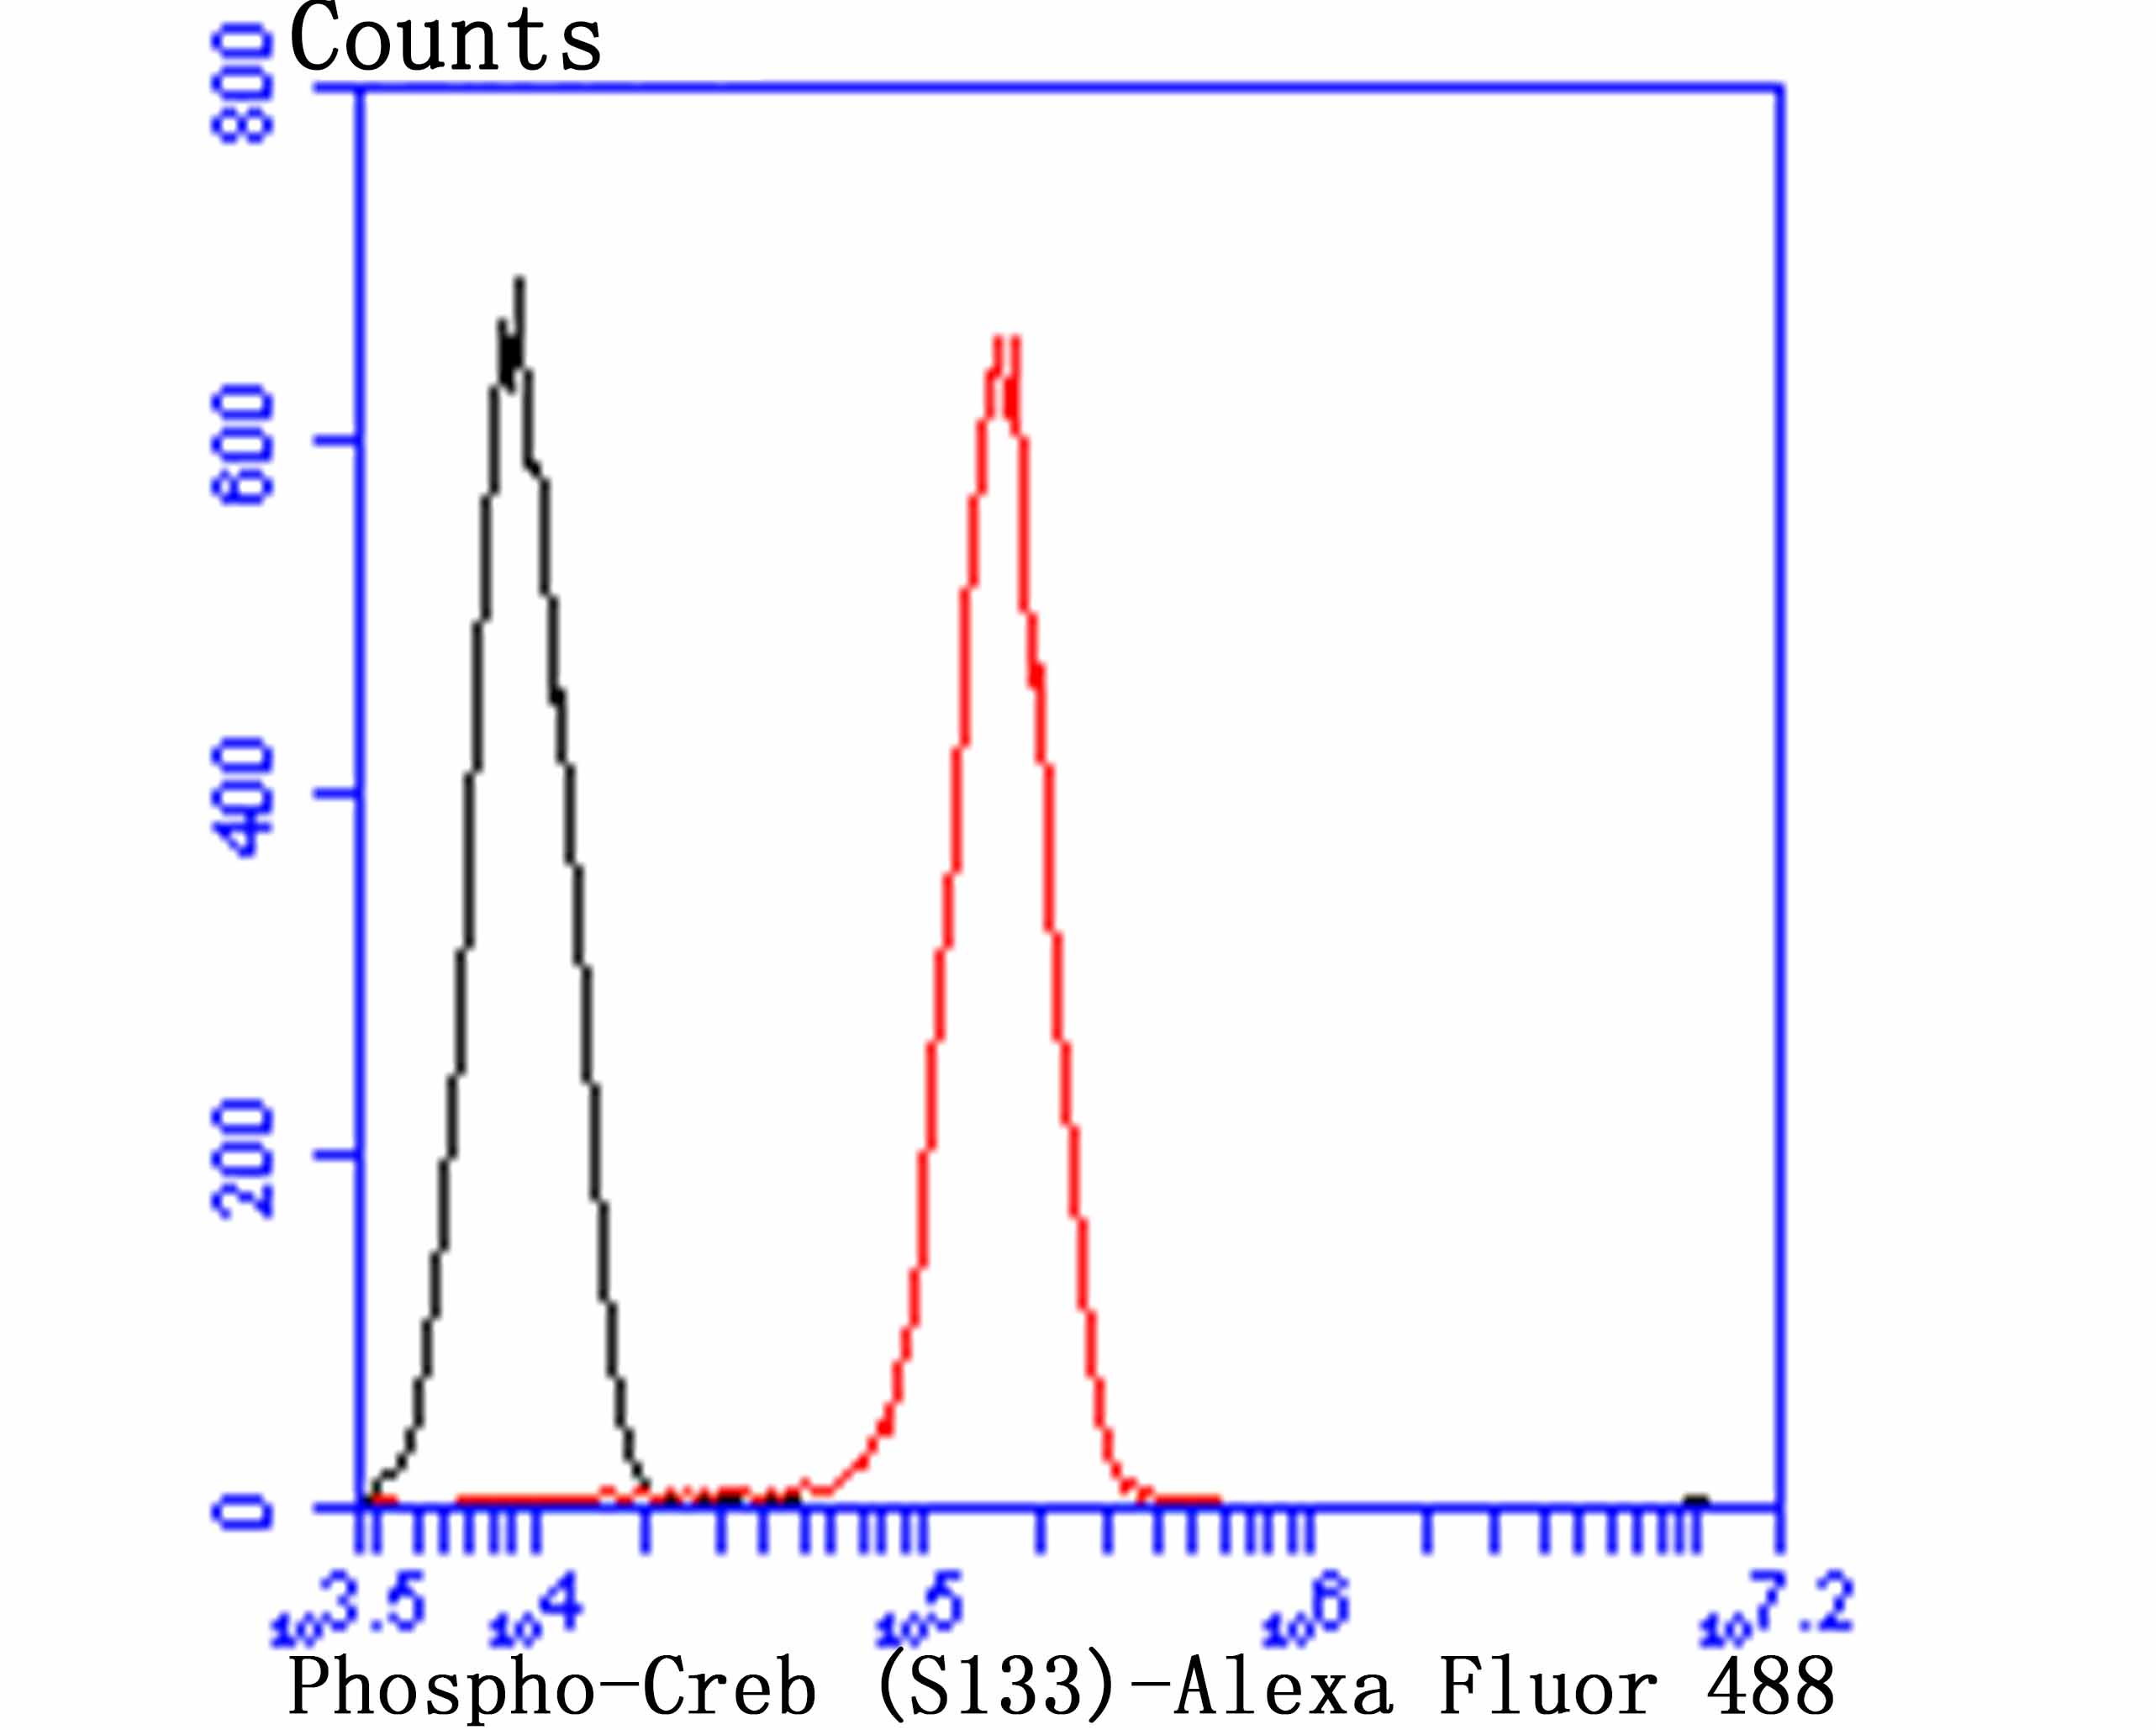 Flow cytometric analysis of Phospho-Creb (S133) was done on HUVEC cells. The cells were fixed, permeabilized and stained with the primary antibody (ET7107-93, 1/50) (red). After incubation of the primary antibody at room temperature for an hour, the cells were stained with a Alexa Fluor 488-conjugated Goat anti-Rabbit IgG Secondary antibody at 1/1000 dilution for 30 minutes.Unlabelled sample was used as a control (cells without incubation with primary antibody; black).